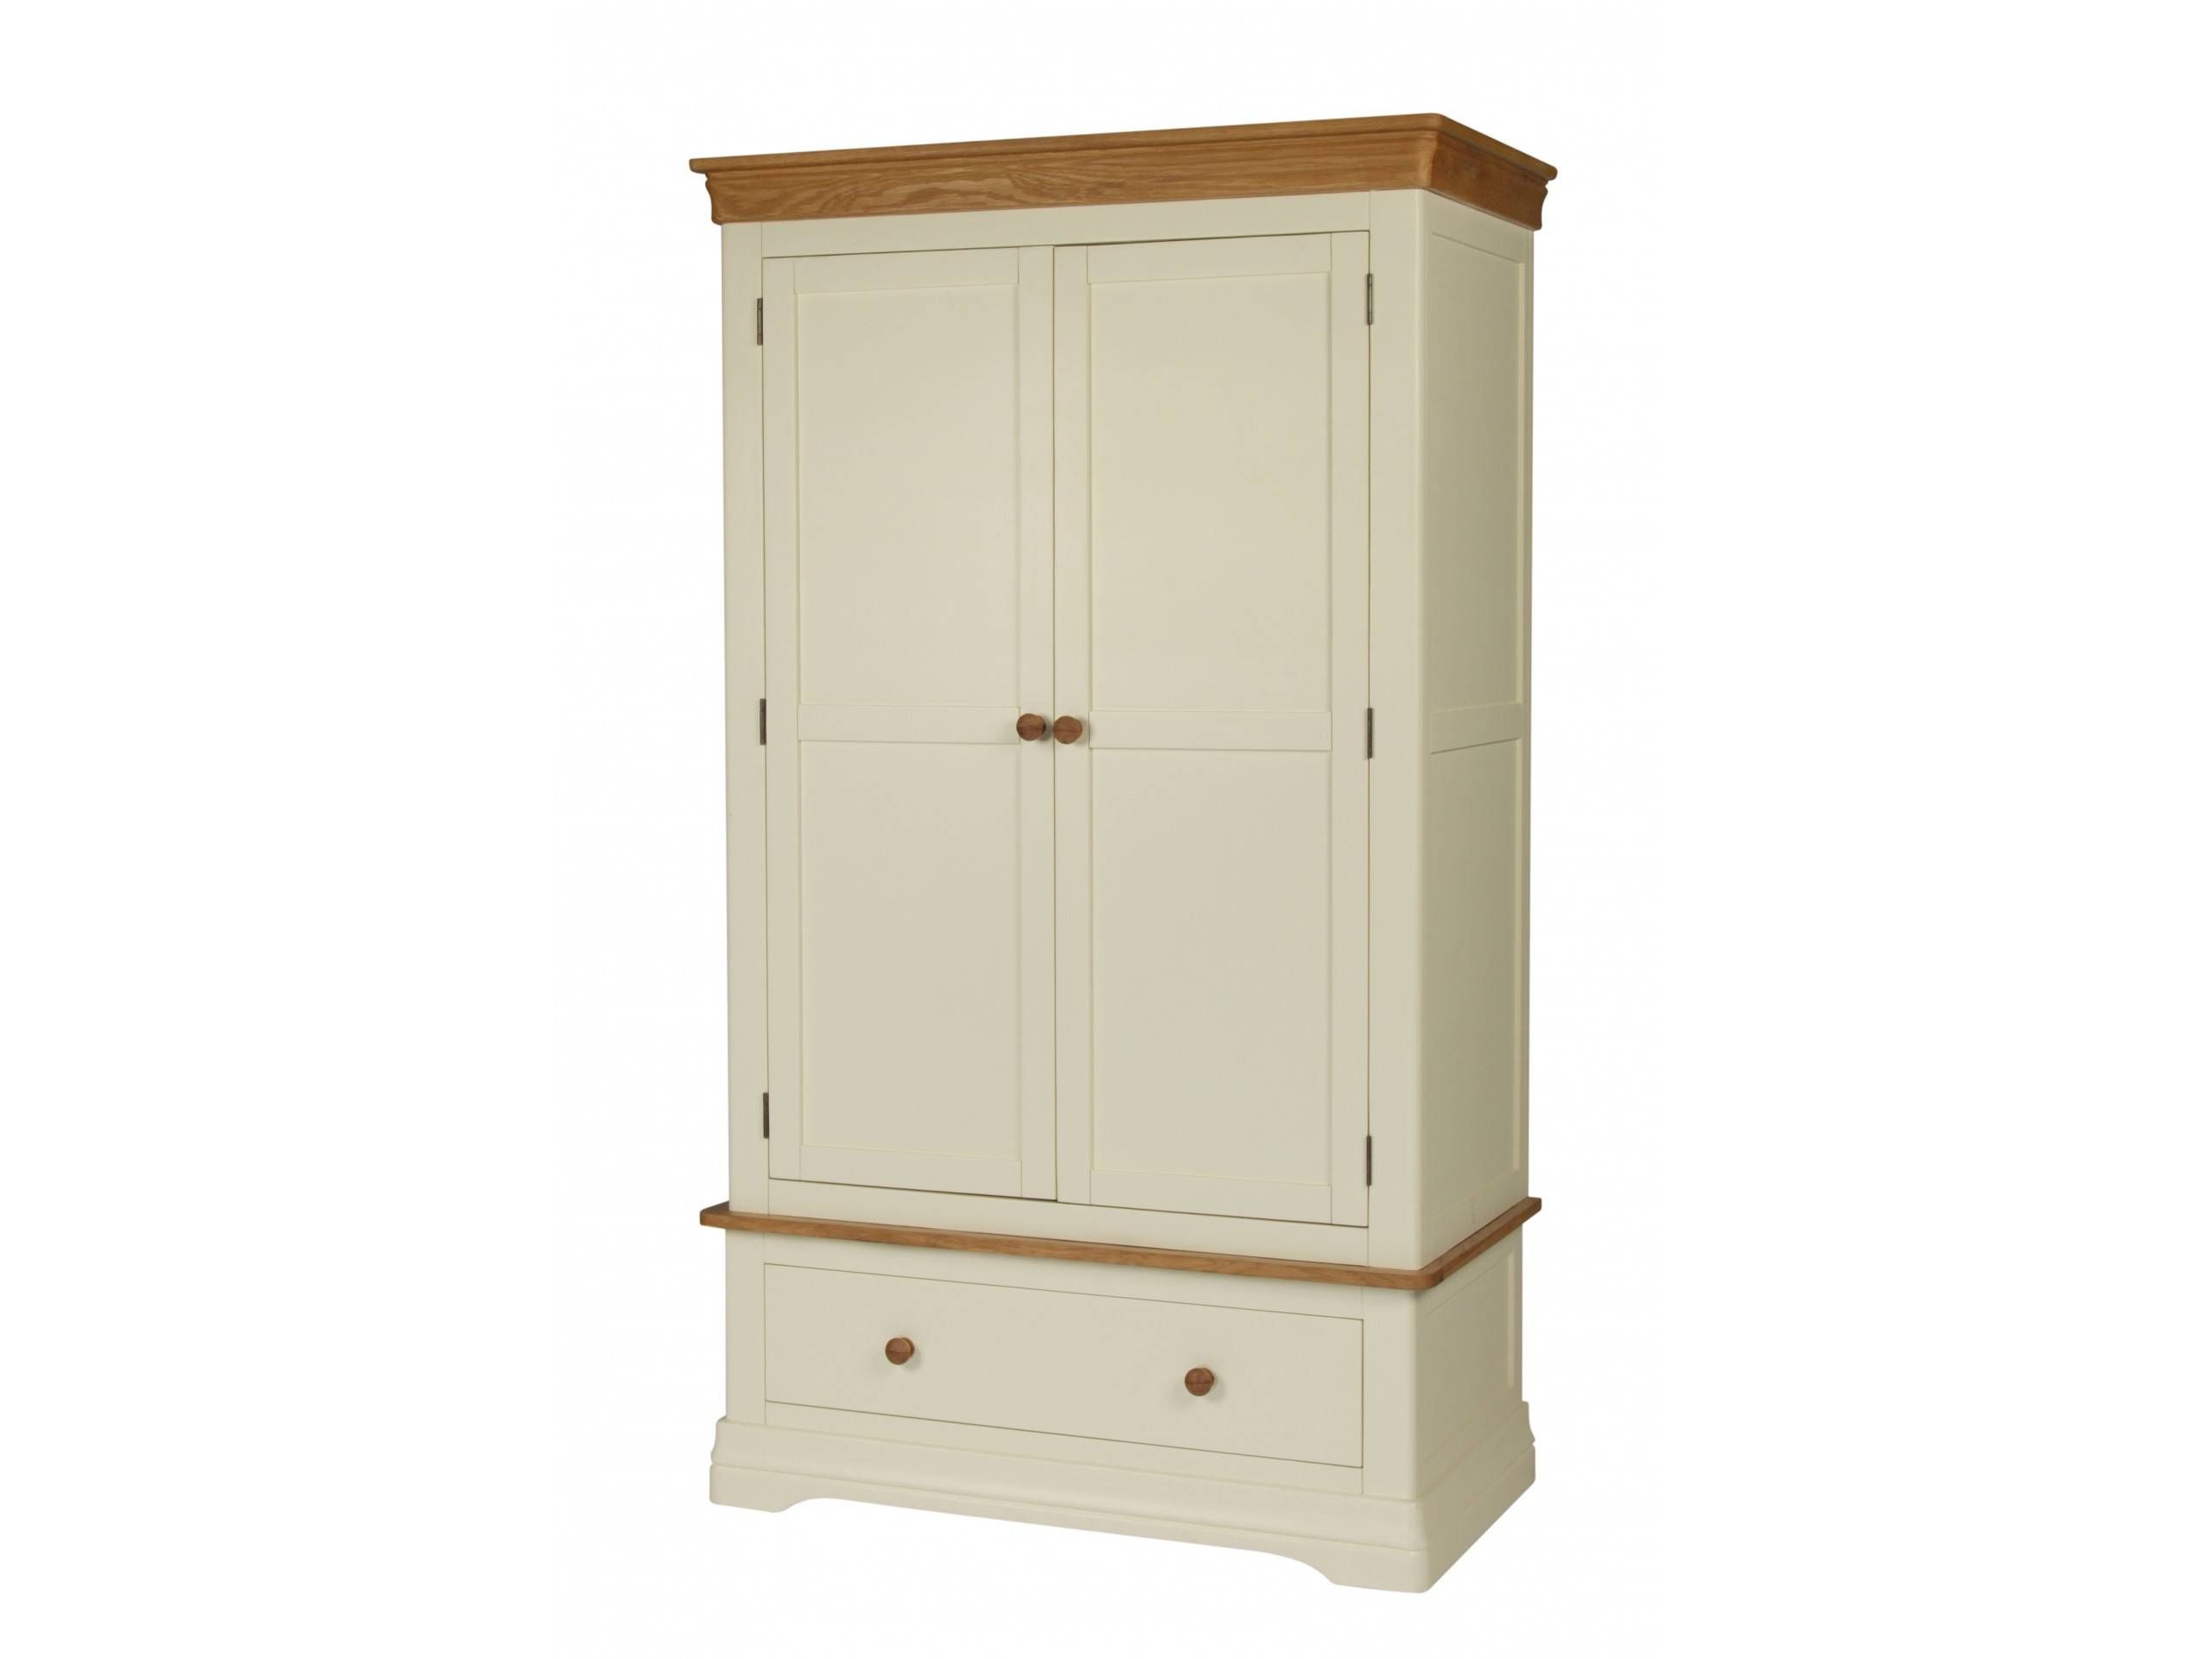 Farmhouse Country Oak Cream Painted Double Wardrobe Throughout Cream Wardrobes (View 2 of 15)